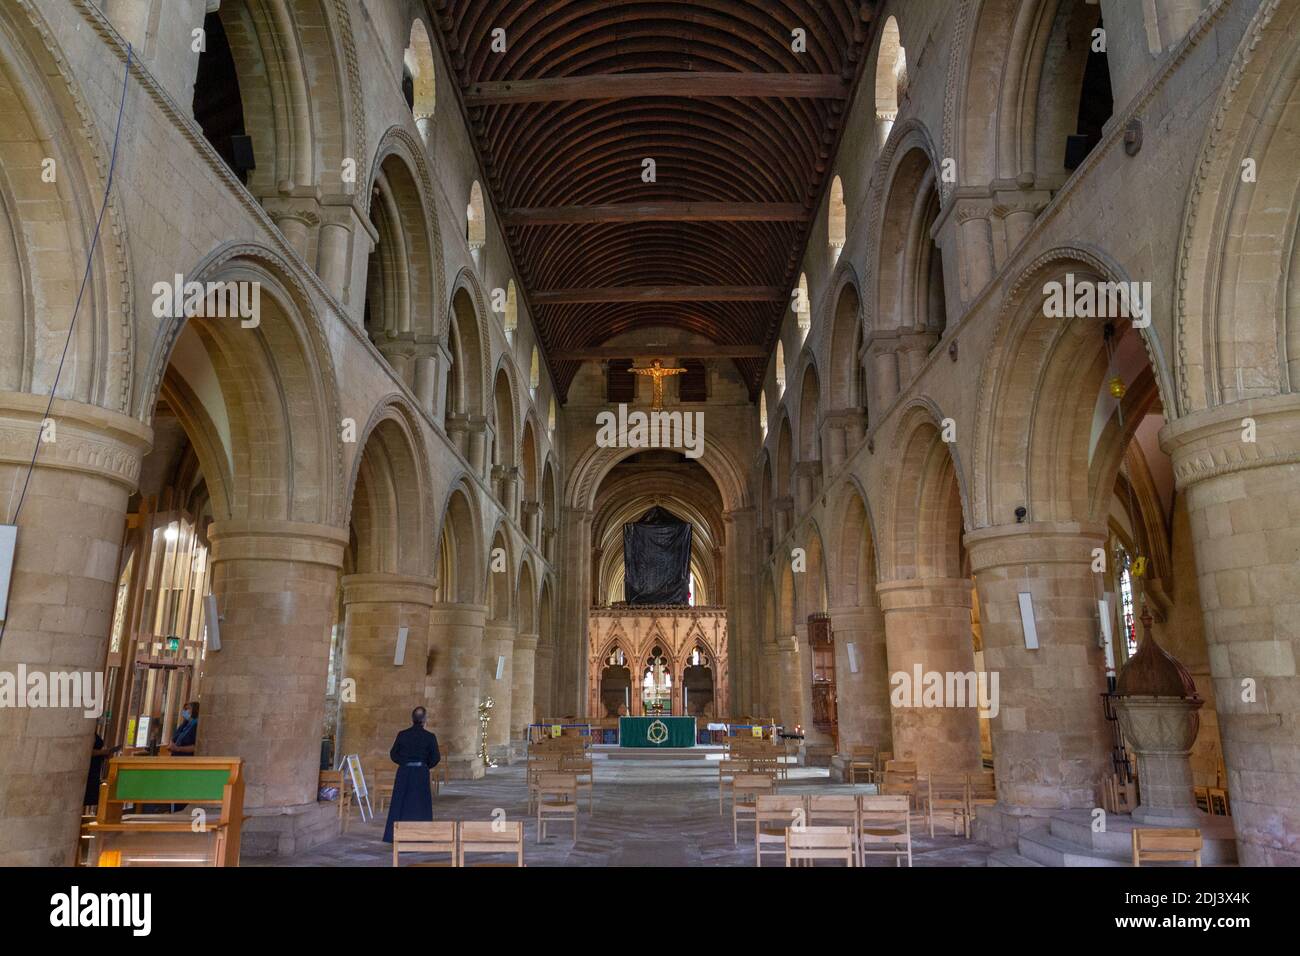 View down the nave inside Southwell Minster, with its wooden barrel vault (ceiling) designed by Ewan Christian, Southwell, Nottinghamshire, UK. Stock Photo